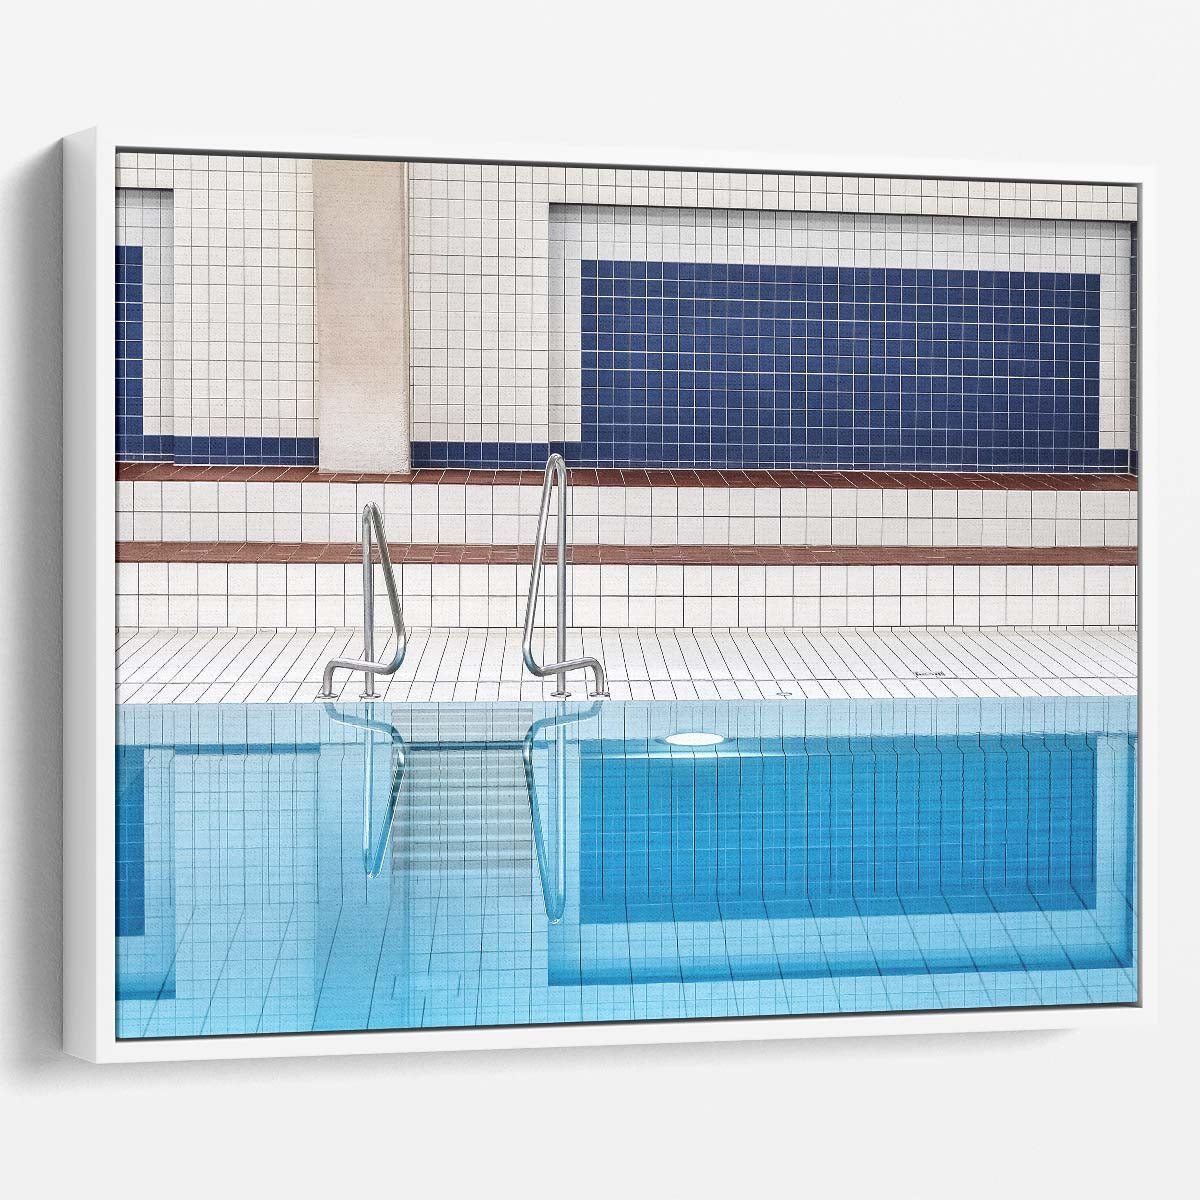 Abstract Indoor Pool Stuttgart Reflection Wall Art by Luxuriance Designs. Made in USA.